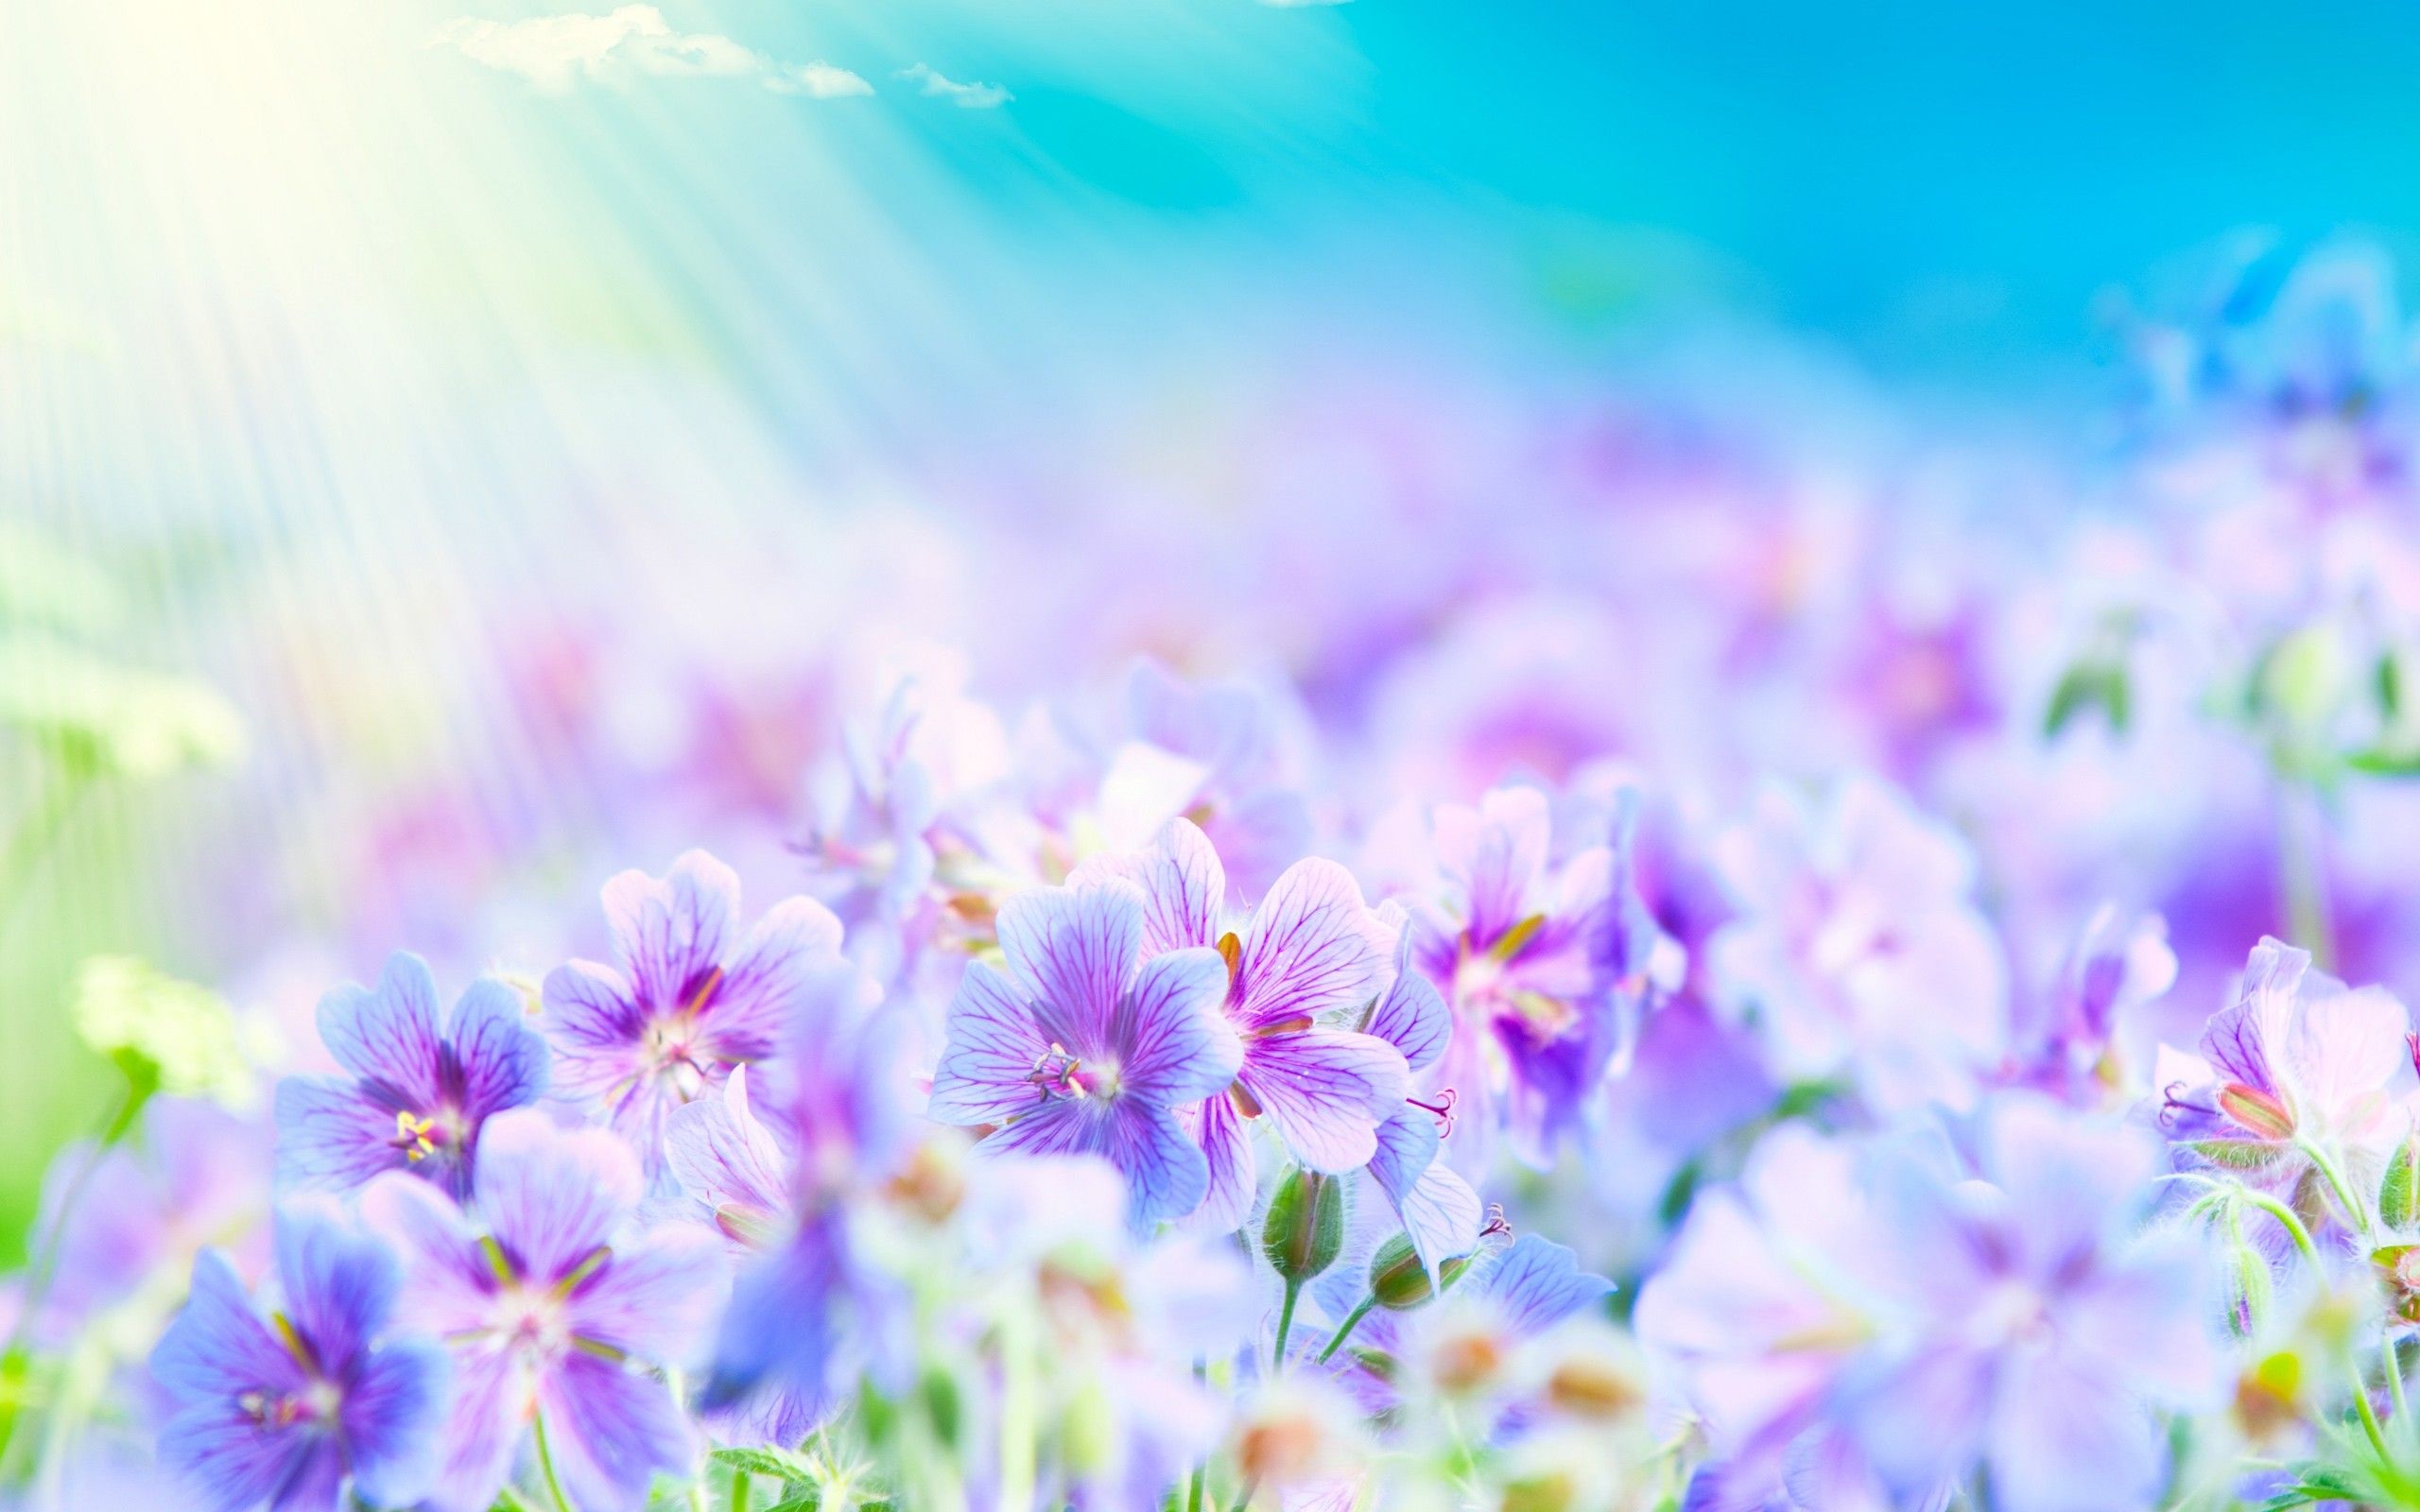 Summer flower blue and purple flowers. Beautiful flowers and plants Wal. Pretty flowers background, Beautiful flowers photo, Purple flowers wallpaper